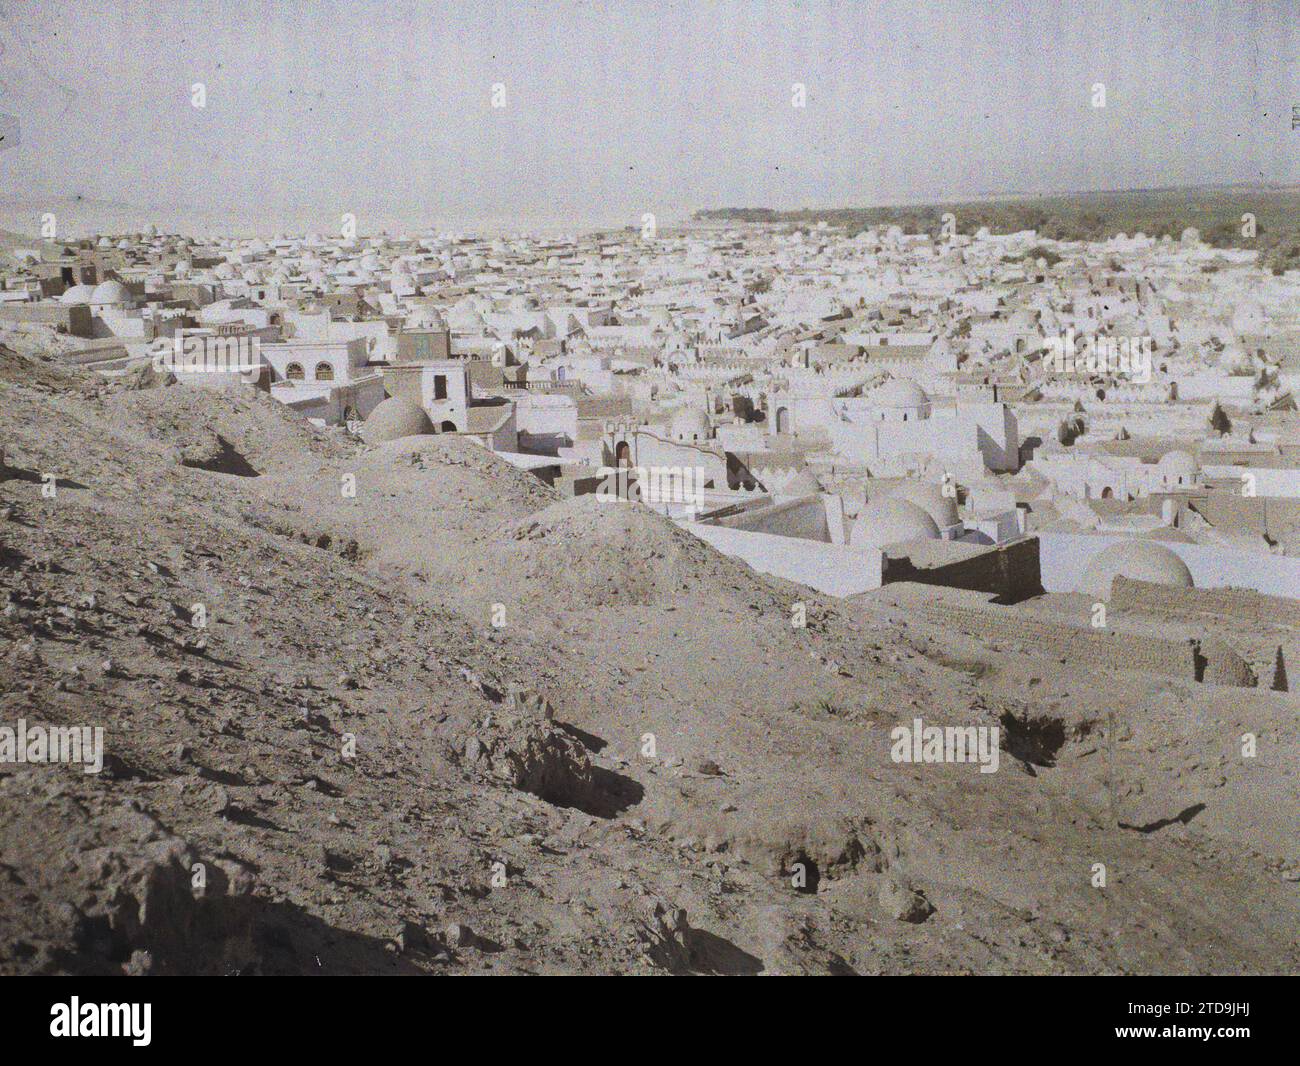 Assiut, Egypt, Africa Panorama of the village cemetery, Habitat, Architecture, Religion, Tomb, Cemetery, Funerary architecture, Islam, Panorama of urban area, Egypt, Assiut, Another view of the necropolis, Assiout, 01/02/1914 - 01/02/1914, Léon, Auguste, photographer, 1914 - Egypte - Auguste Léon - (January-February), Autochrome, photo, Glass, Autochrome, photo, Positive, Horizontal, Size 9 x 12 cm Stock Photo